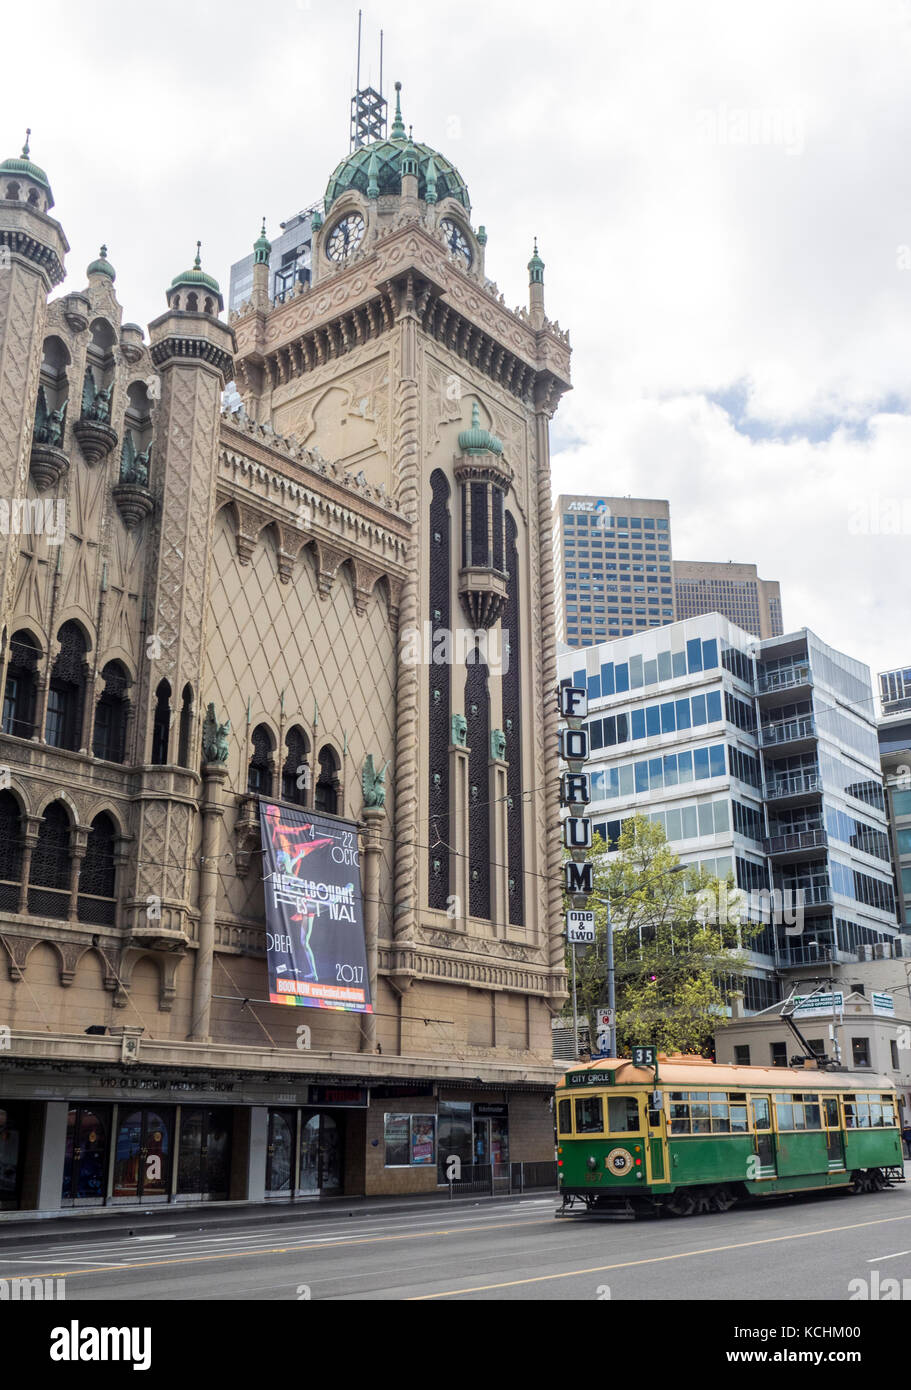 Iconic Melbourne tram on Flinders Street in front of the Forum Theatre, Melbourne Victoria Australia. Stock Photo